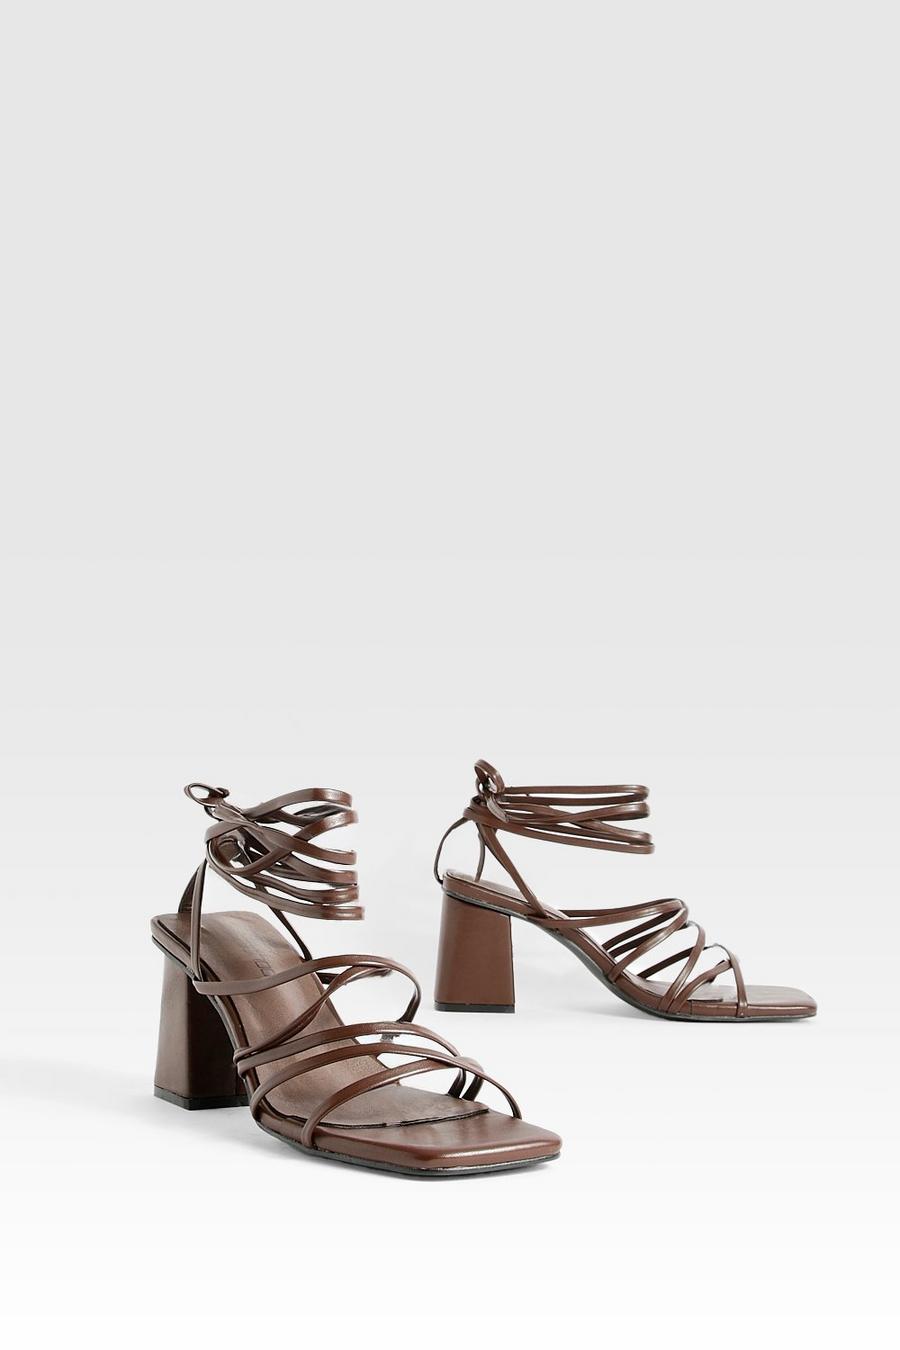 Chocolate Low Block Strappy Tie Up Sandals